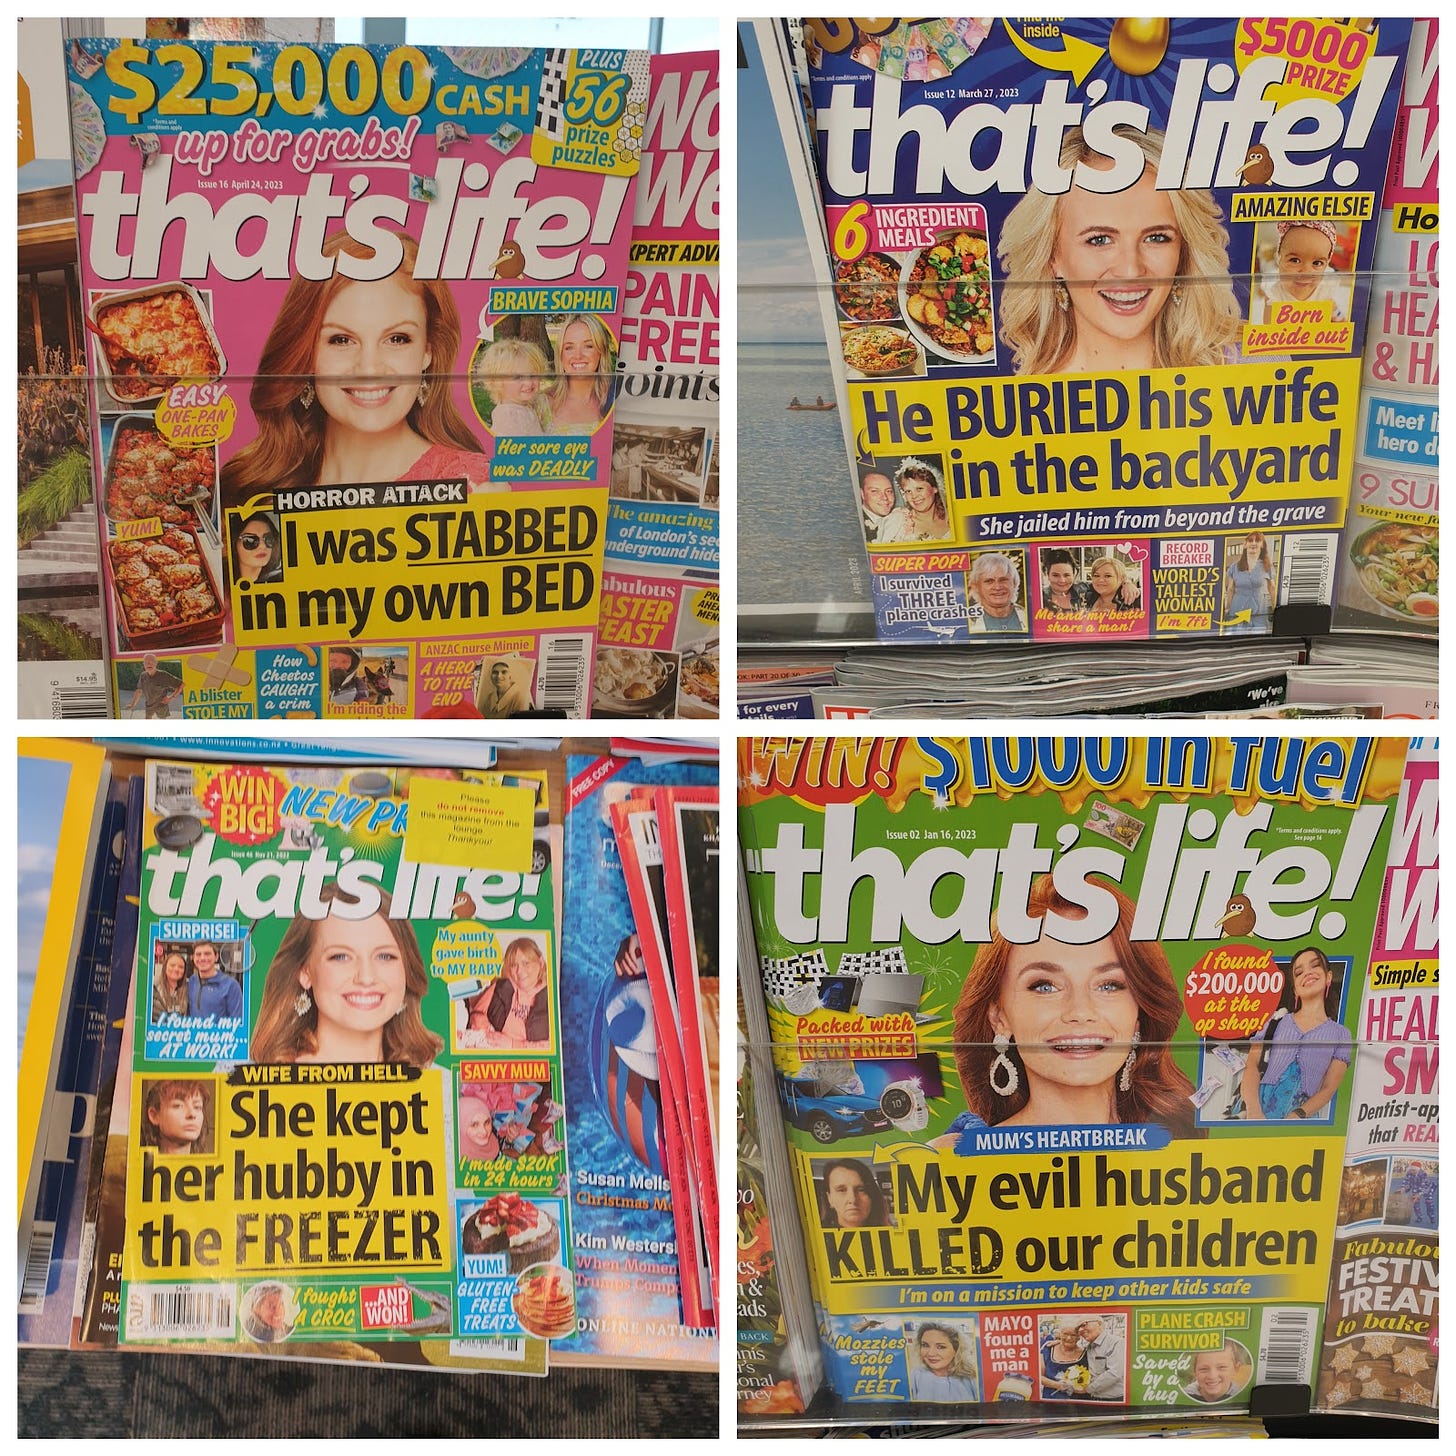 Various horrible headlines on That's Life magazines, taken by Hayden as he yelped into the void